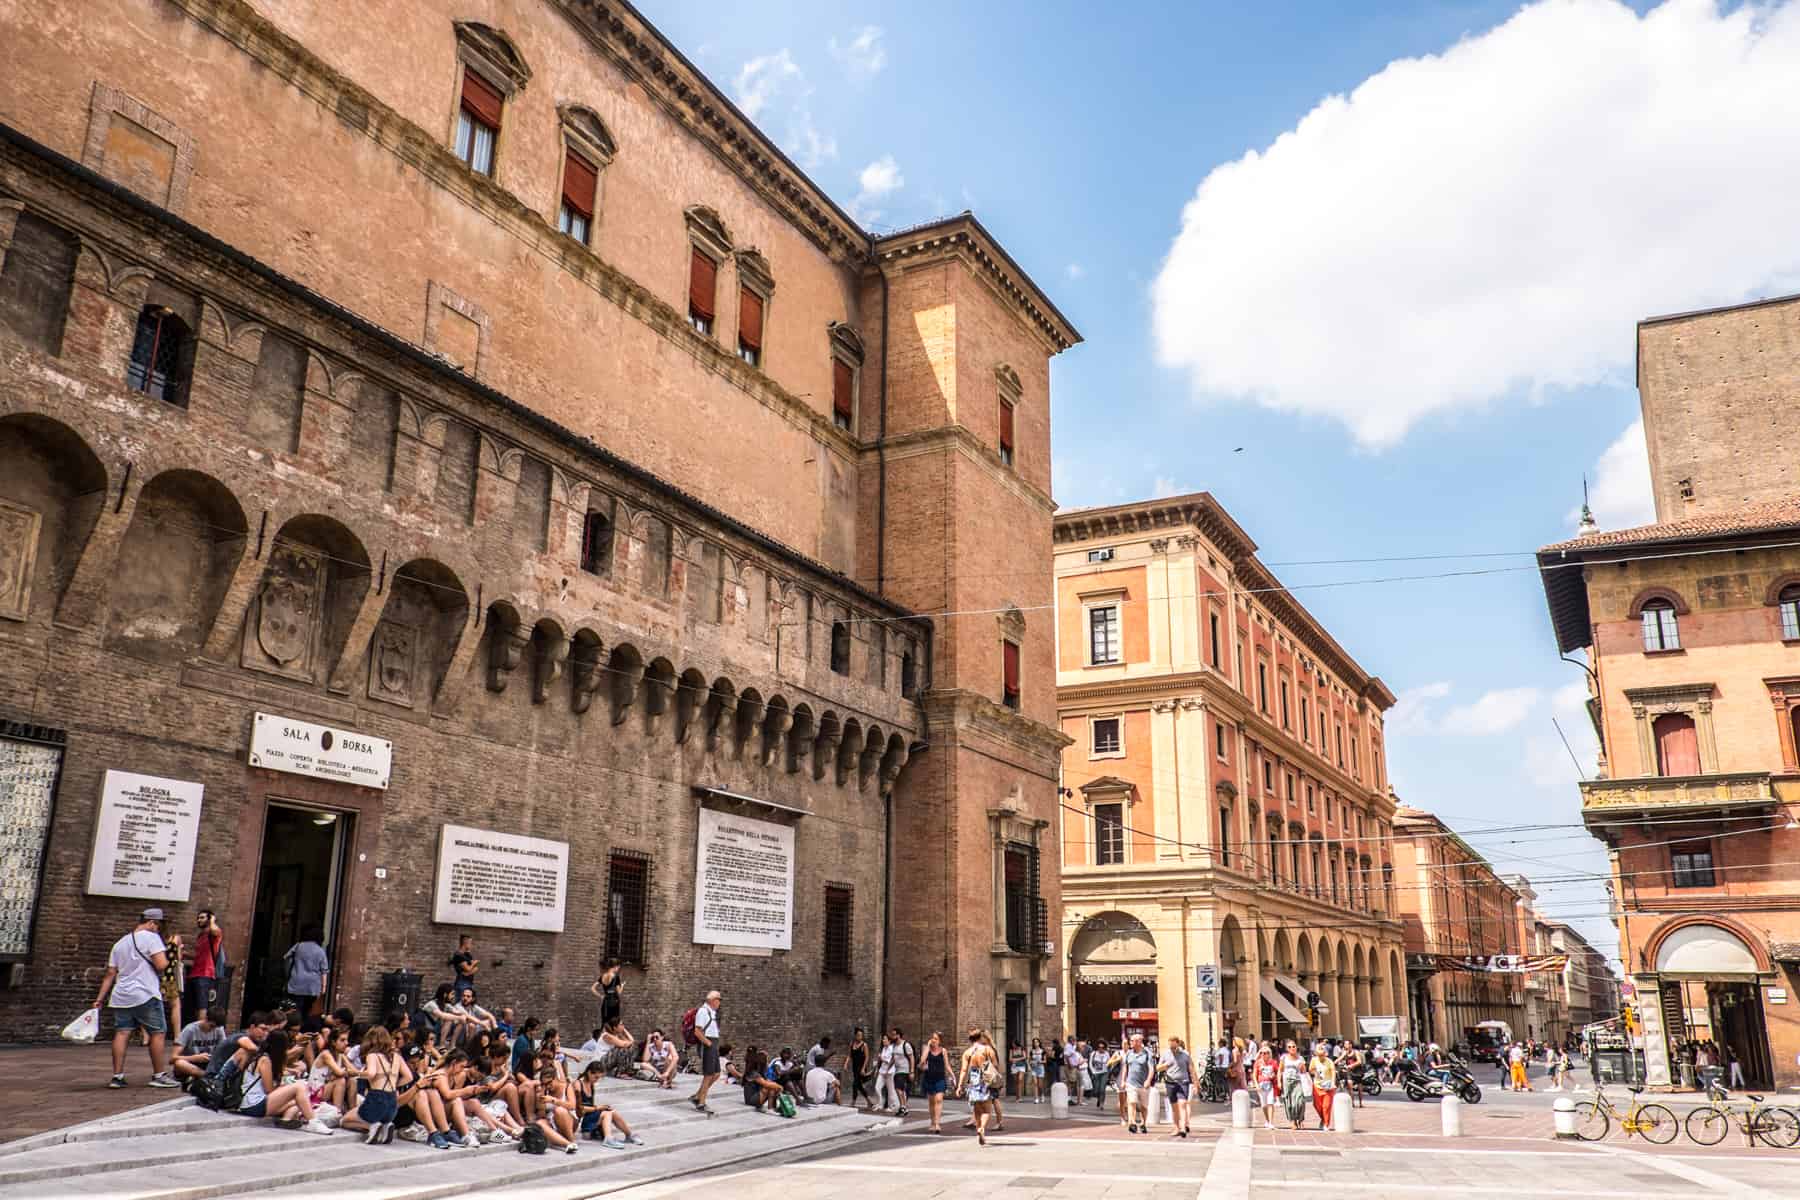 People sitting on the stairs below the white signs on a tall, brown and orange stone medieval building in Bologna. 